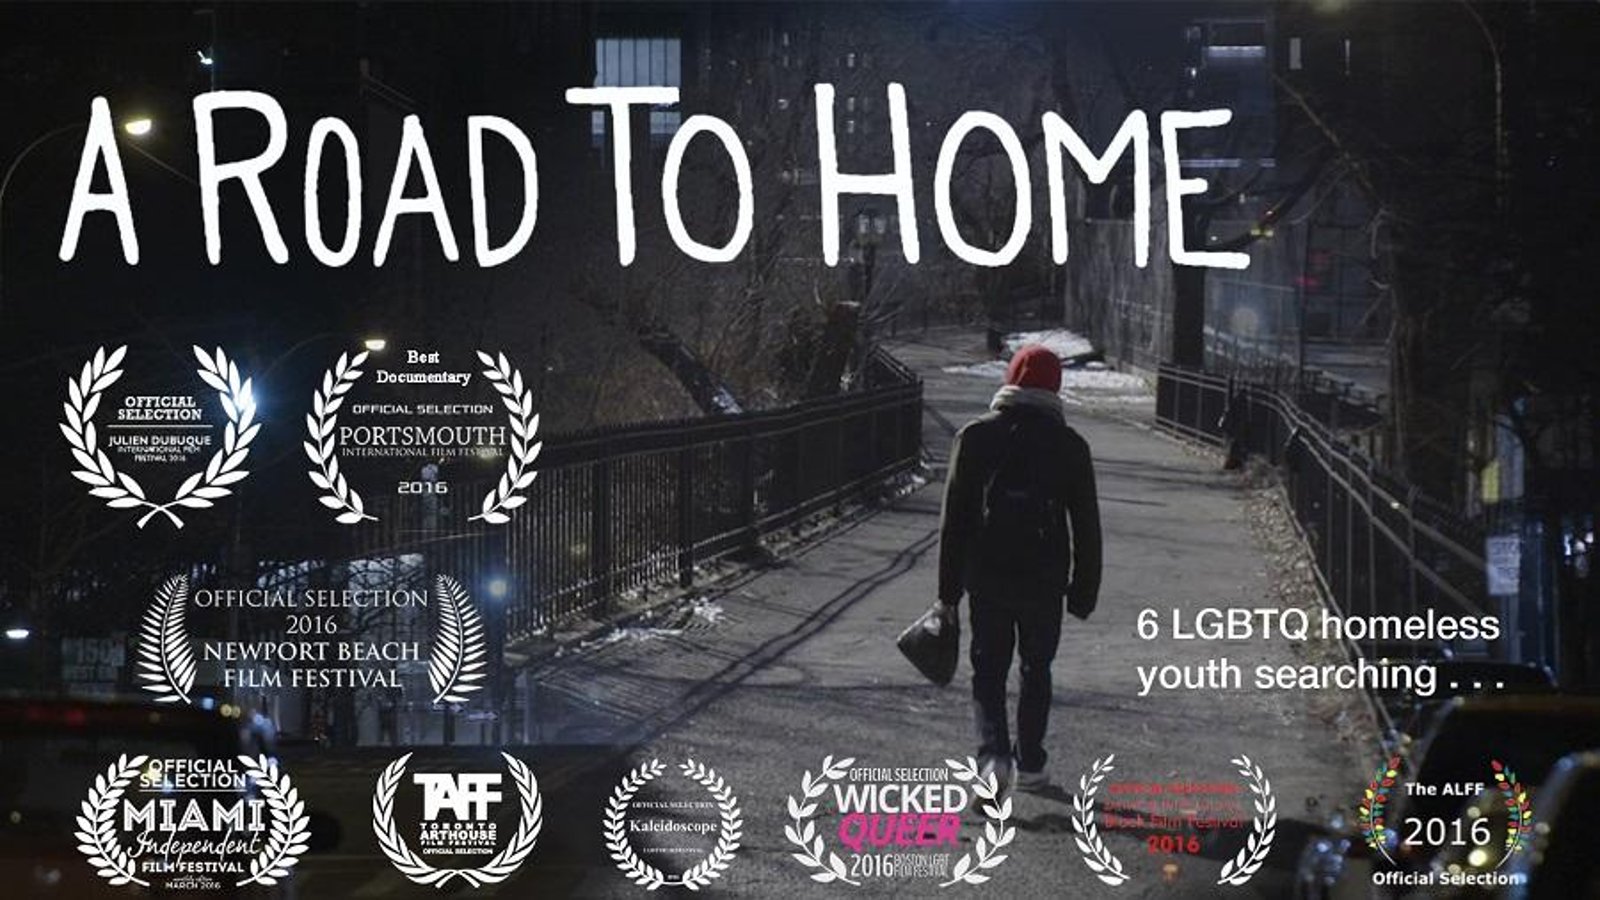 A Road to Home - Stories of Homeless LGBTQ Youth of New York City